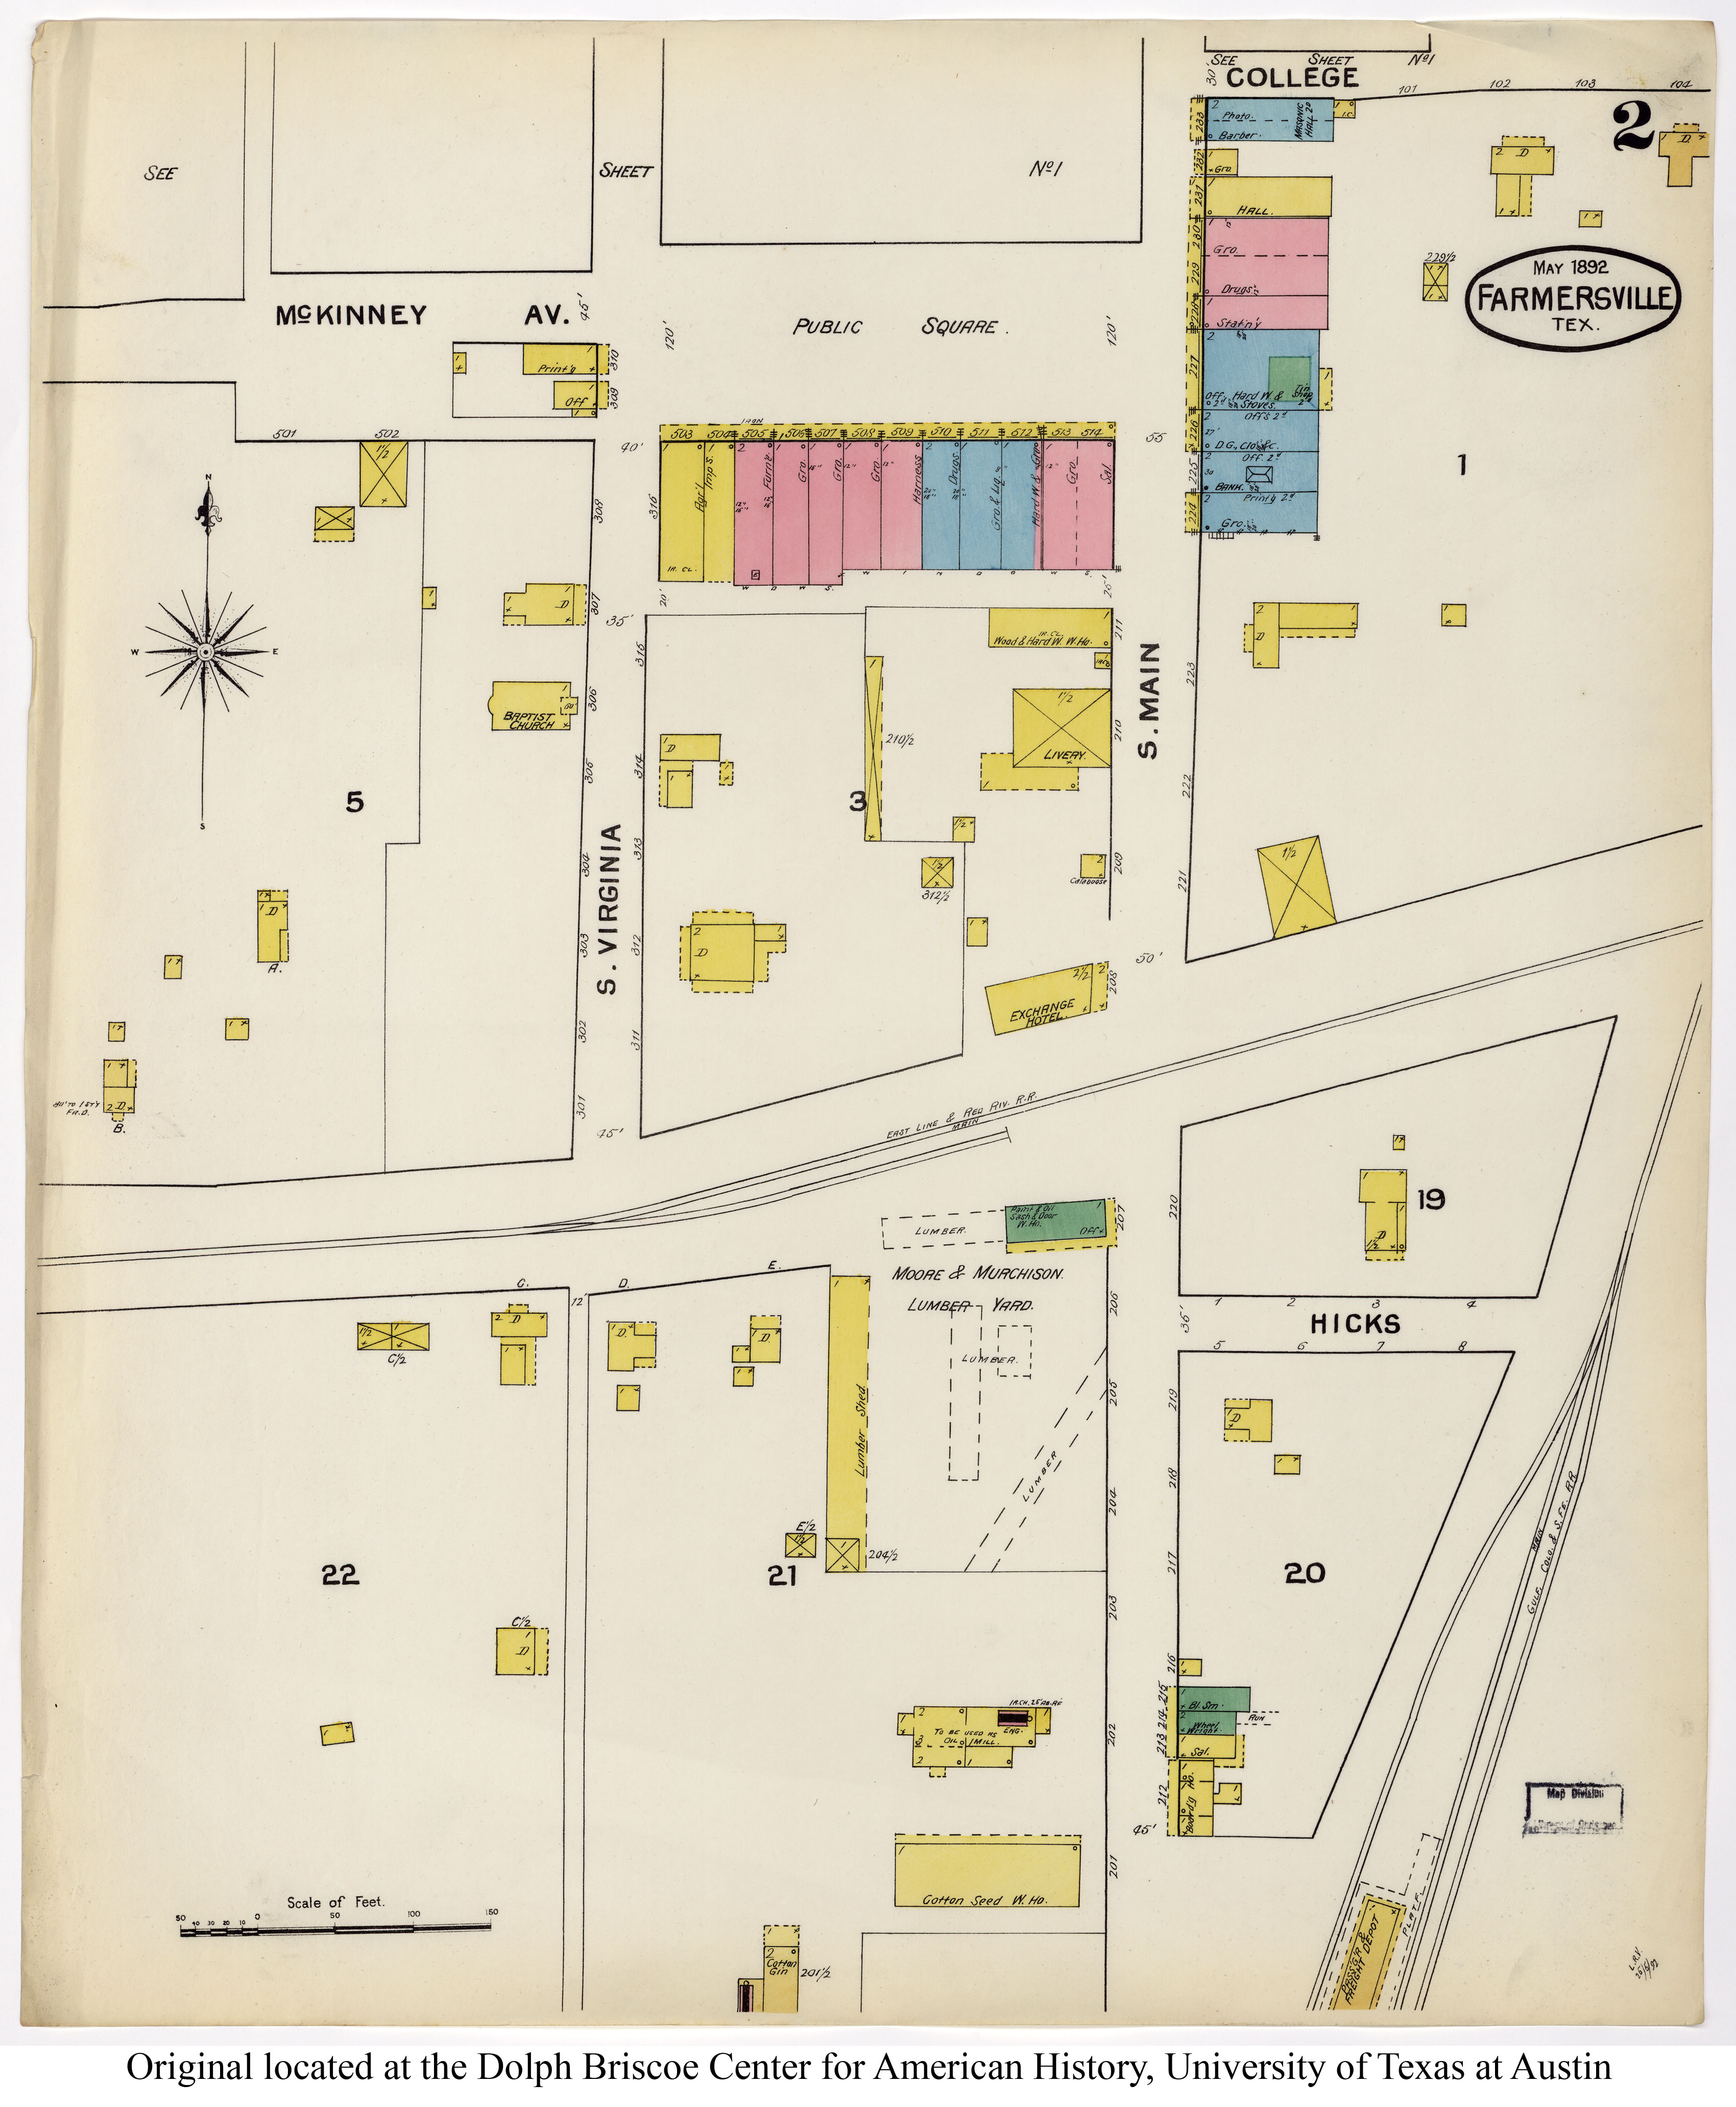 Murfreesboro Tennessee~Sanborn Map© sheets~1887 to 1897 with 17 maps in COLOR 